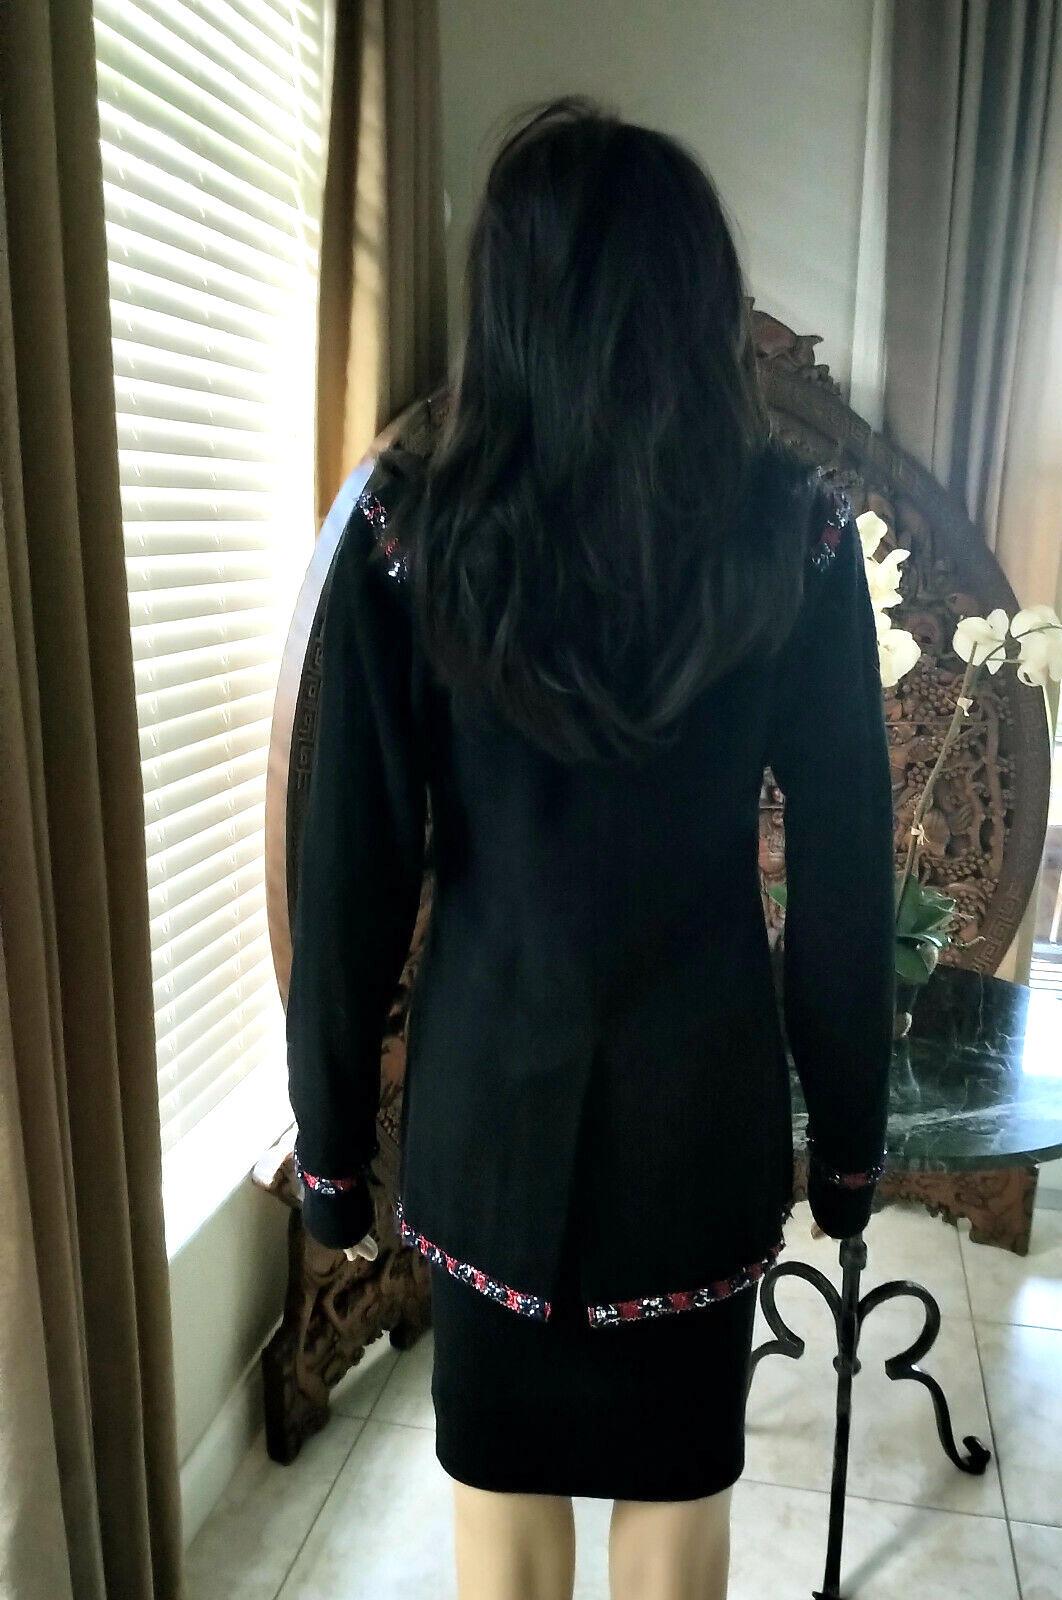 Chanel 2012 12A Paris-Bombay Black & Red Beaded Crest Patch Jacket FR 38/ US 4 6 For Sale 3